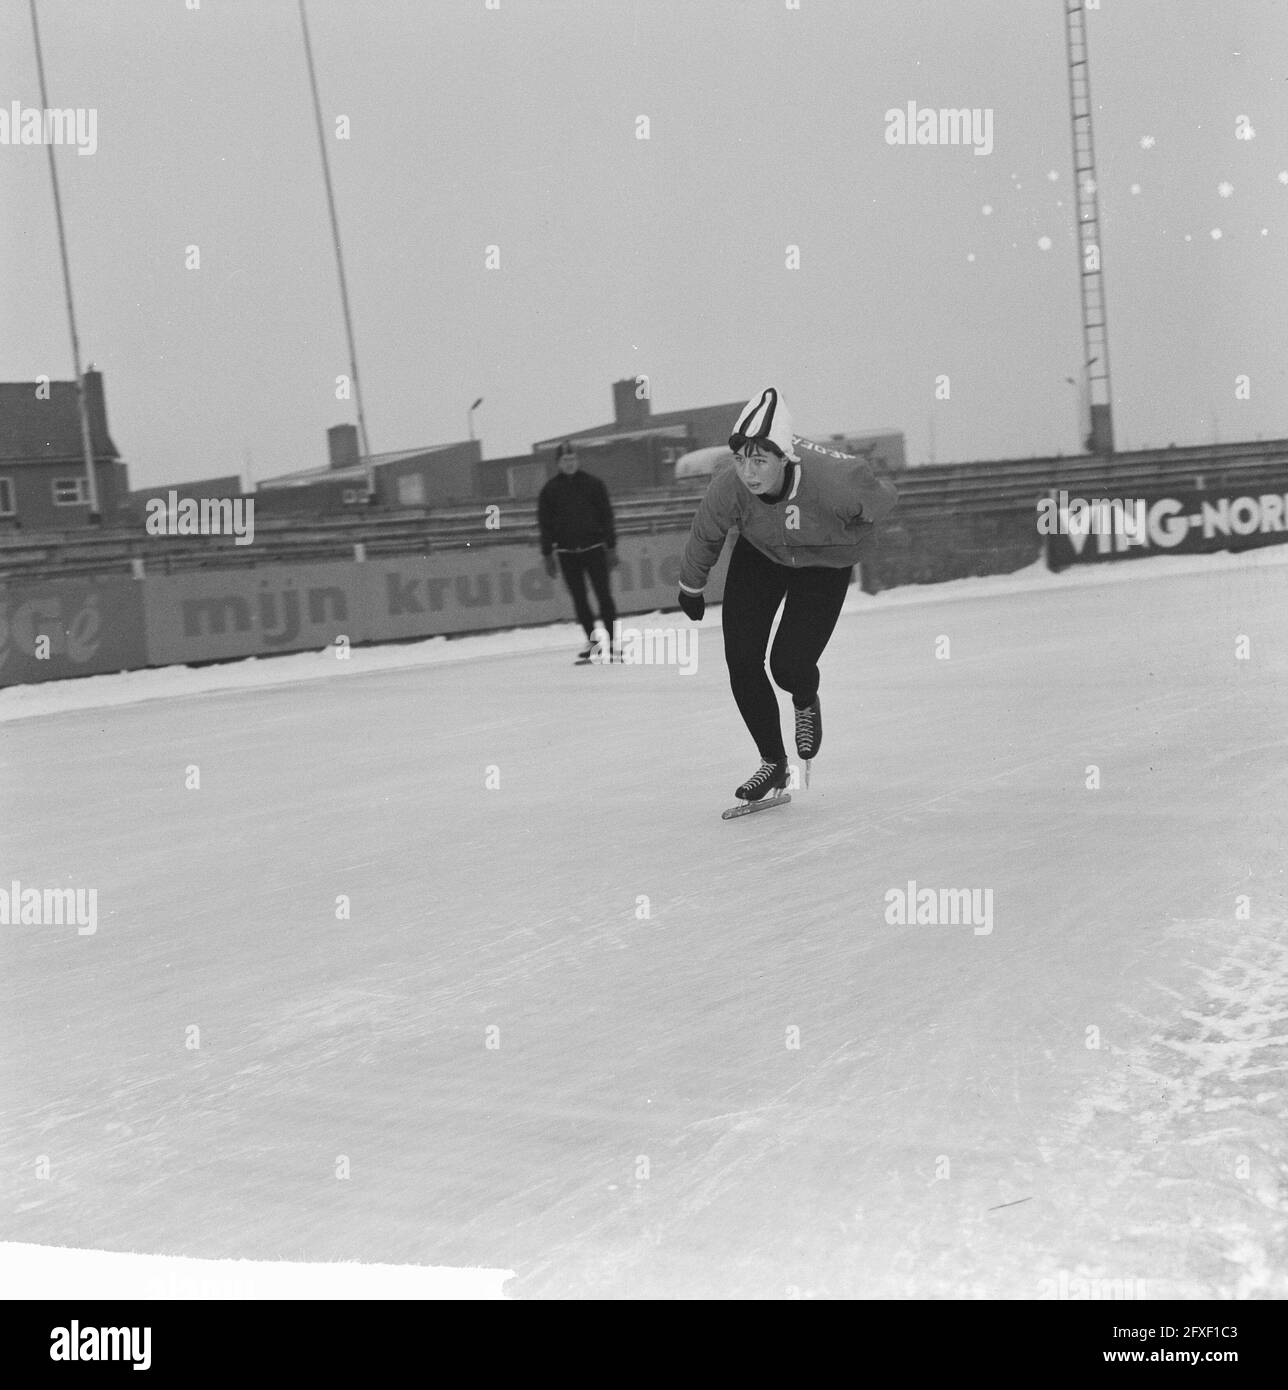 Training Dutch core team on Deventer artificial ice rink. Carry Geijssen, December 12, 1963, skating, sports, The Netherlands, 20th century press agency photo, news to remember, documentary, historic photography 1945-1990, visual stories, human history of the Twentieth Century, capturing moments in time Stock Photo